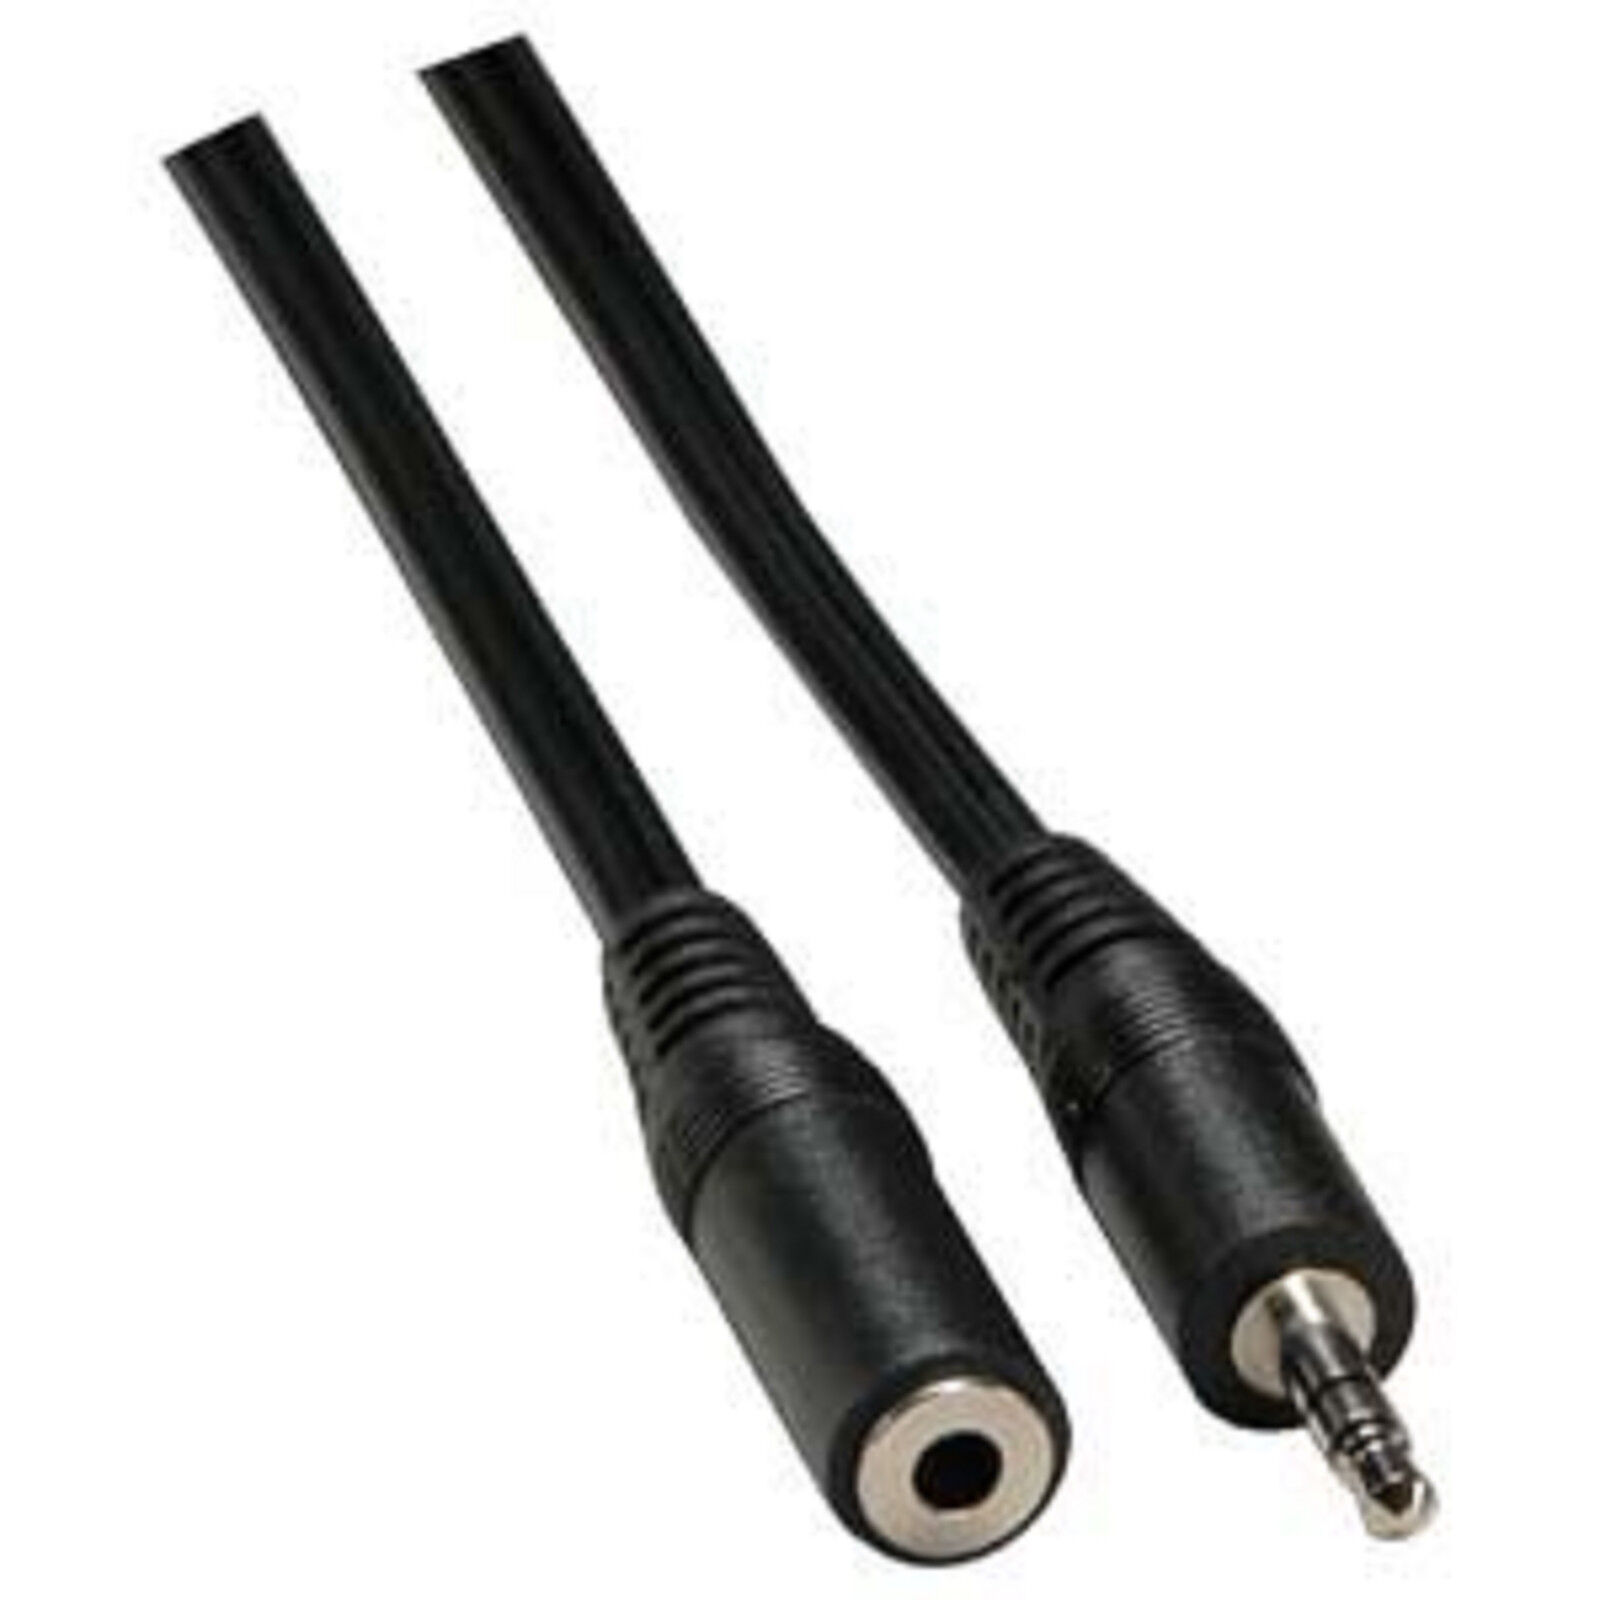 25ft Black 3.5mm Male to 3.5mm Female Stereo Audio Cable - Black